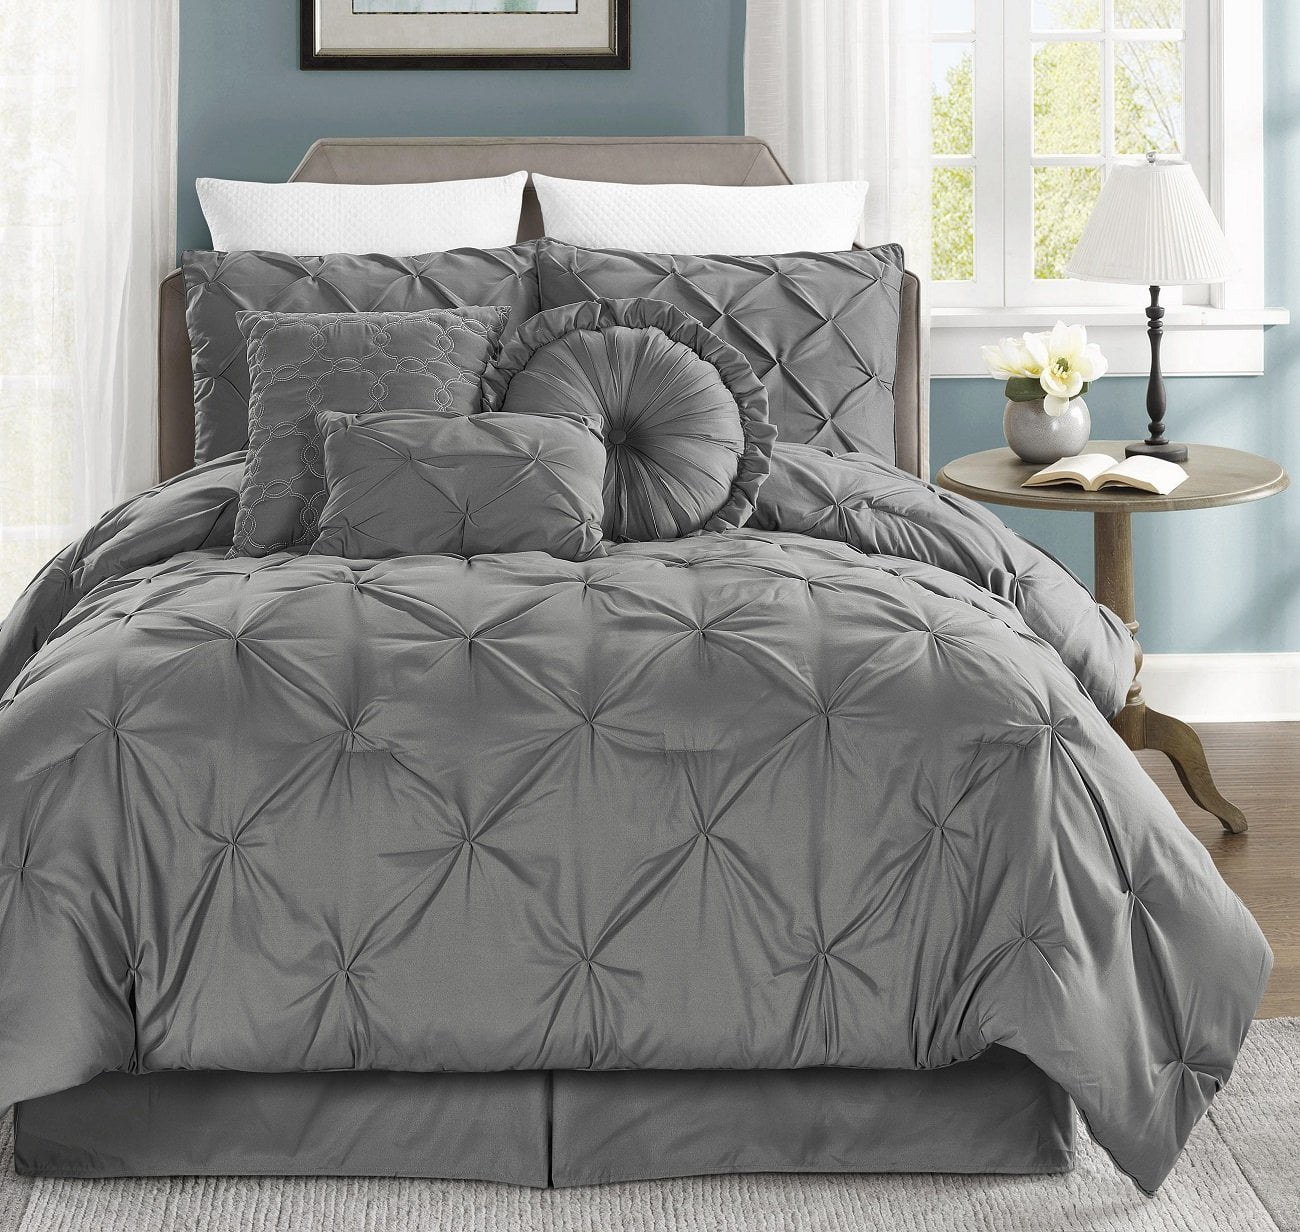 Chezmoi Collection Sydney 7-Piece Teal Pinch Pleated Pintuck Comforter Set 